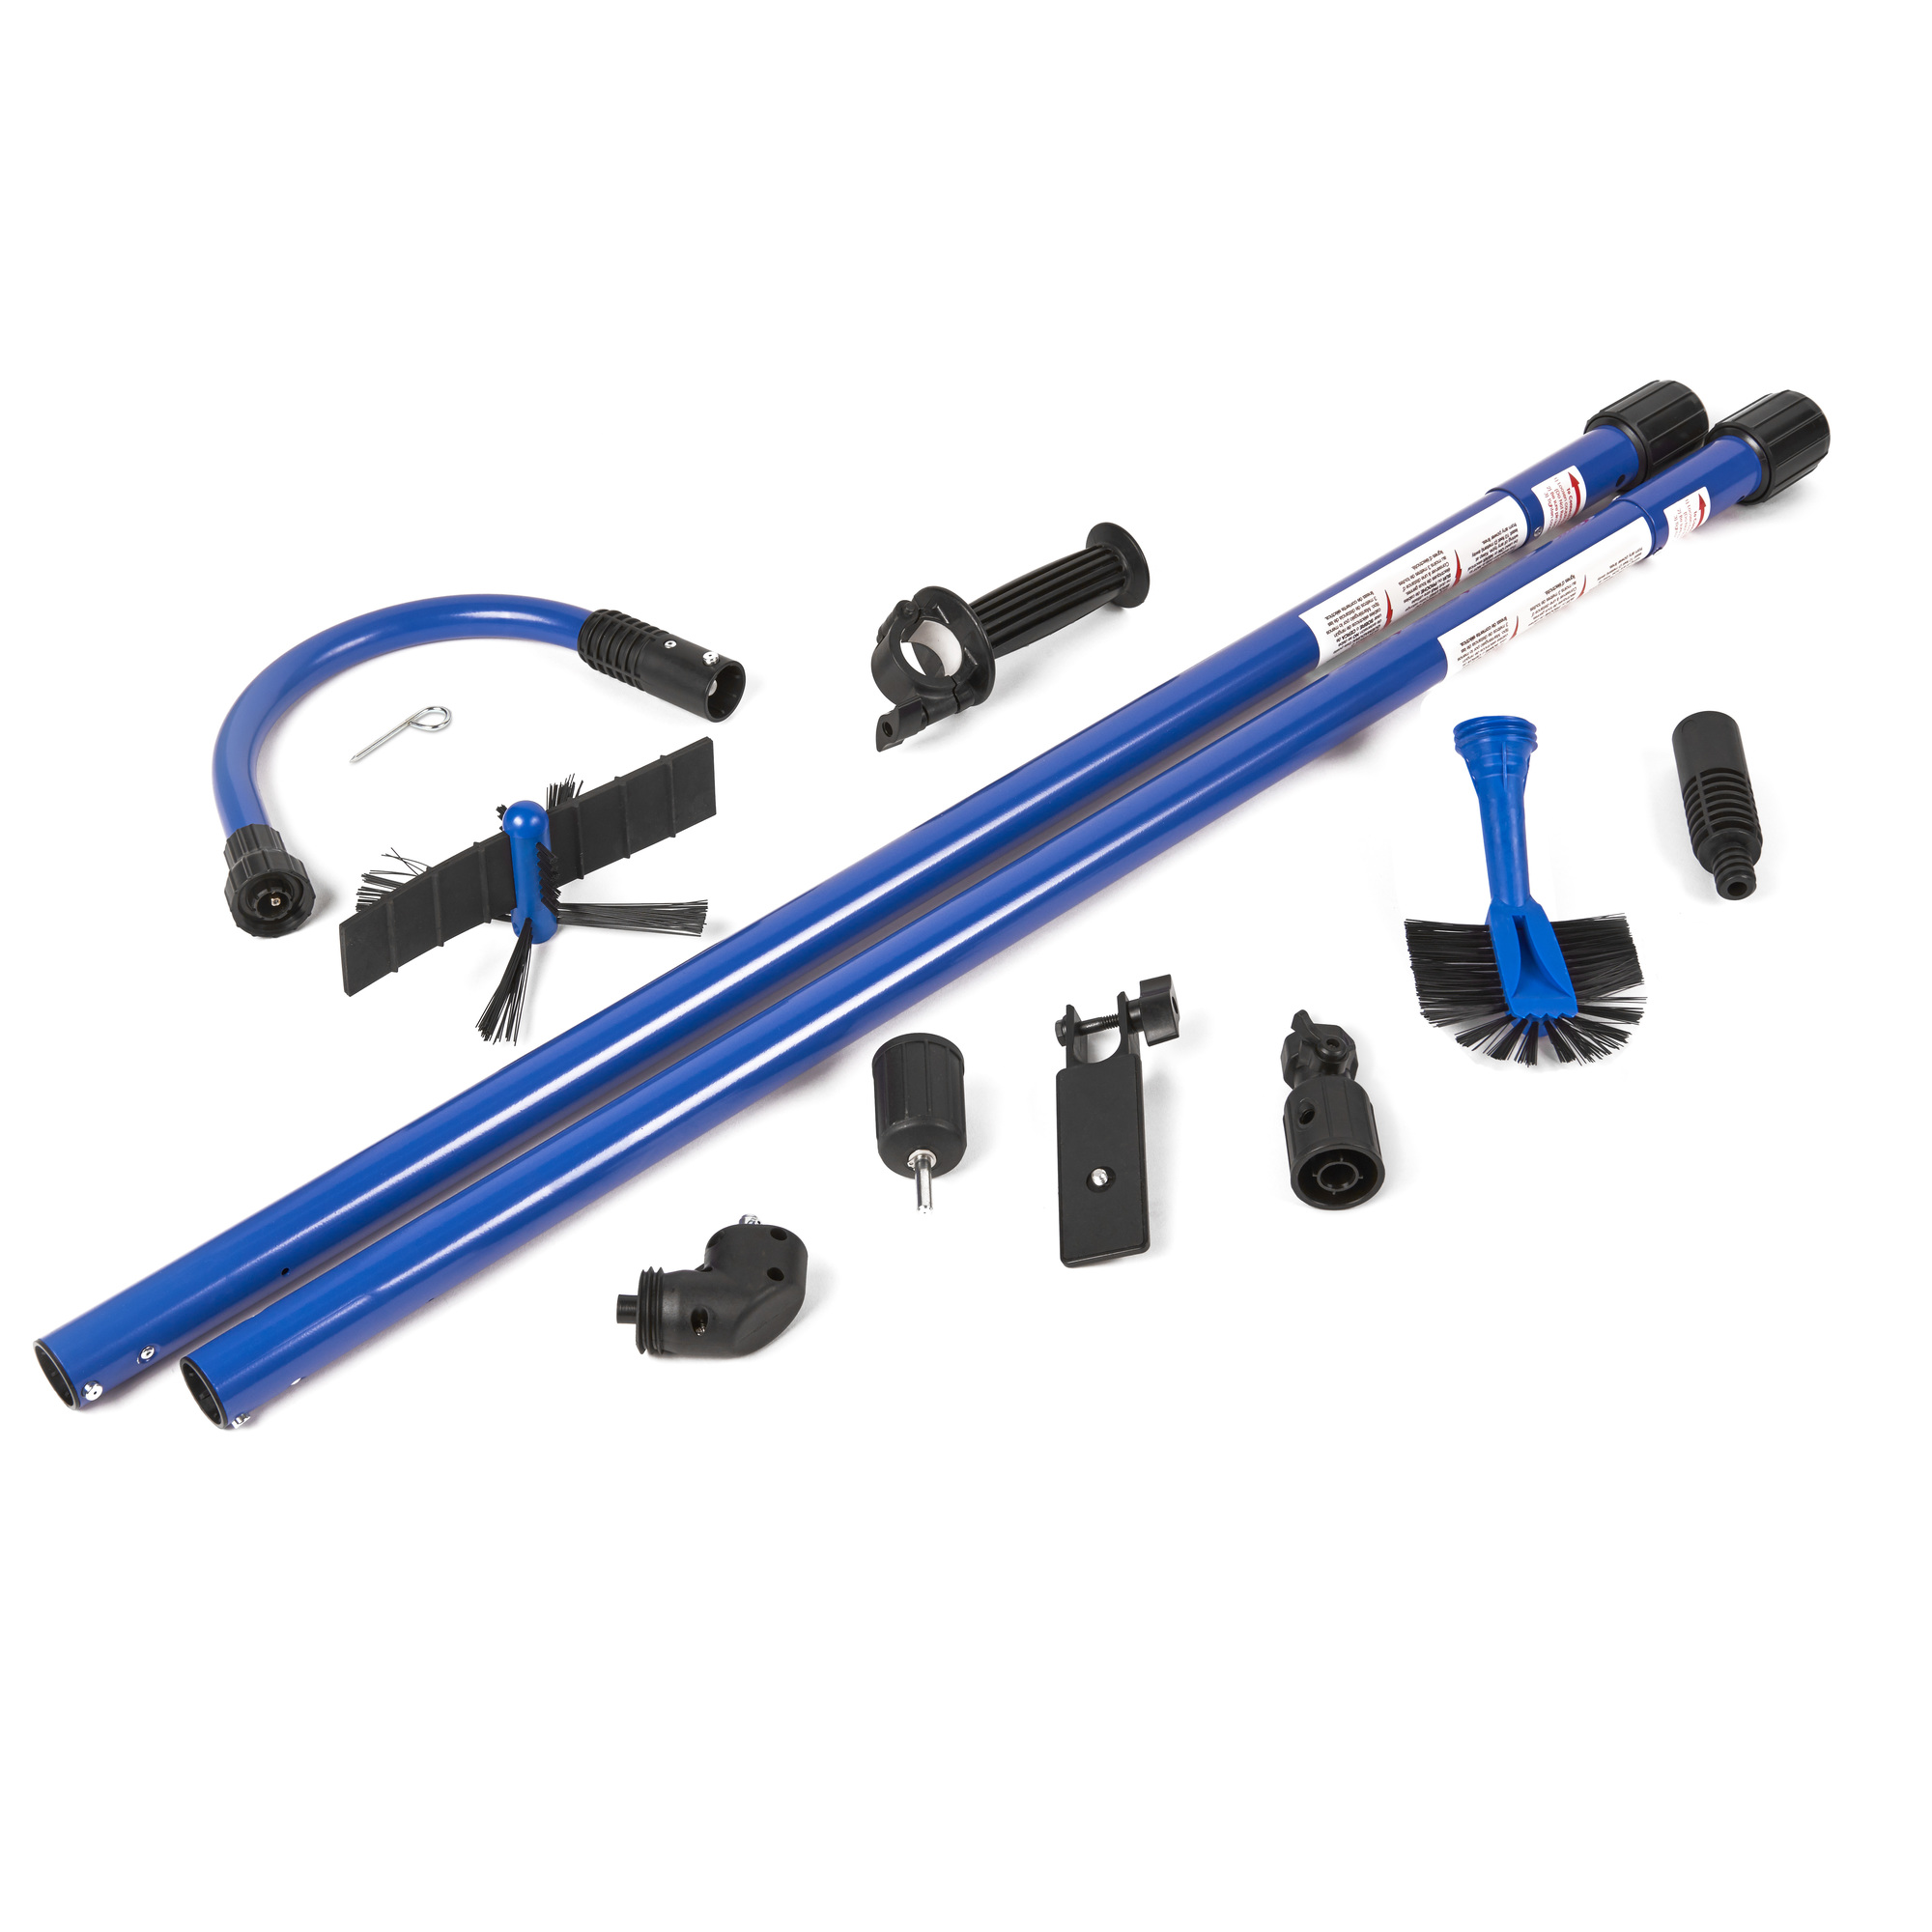 Gardus, Rotary Gutter Cleaning System, Length 6 ft, Material Plastic, Model GS900